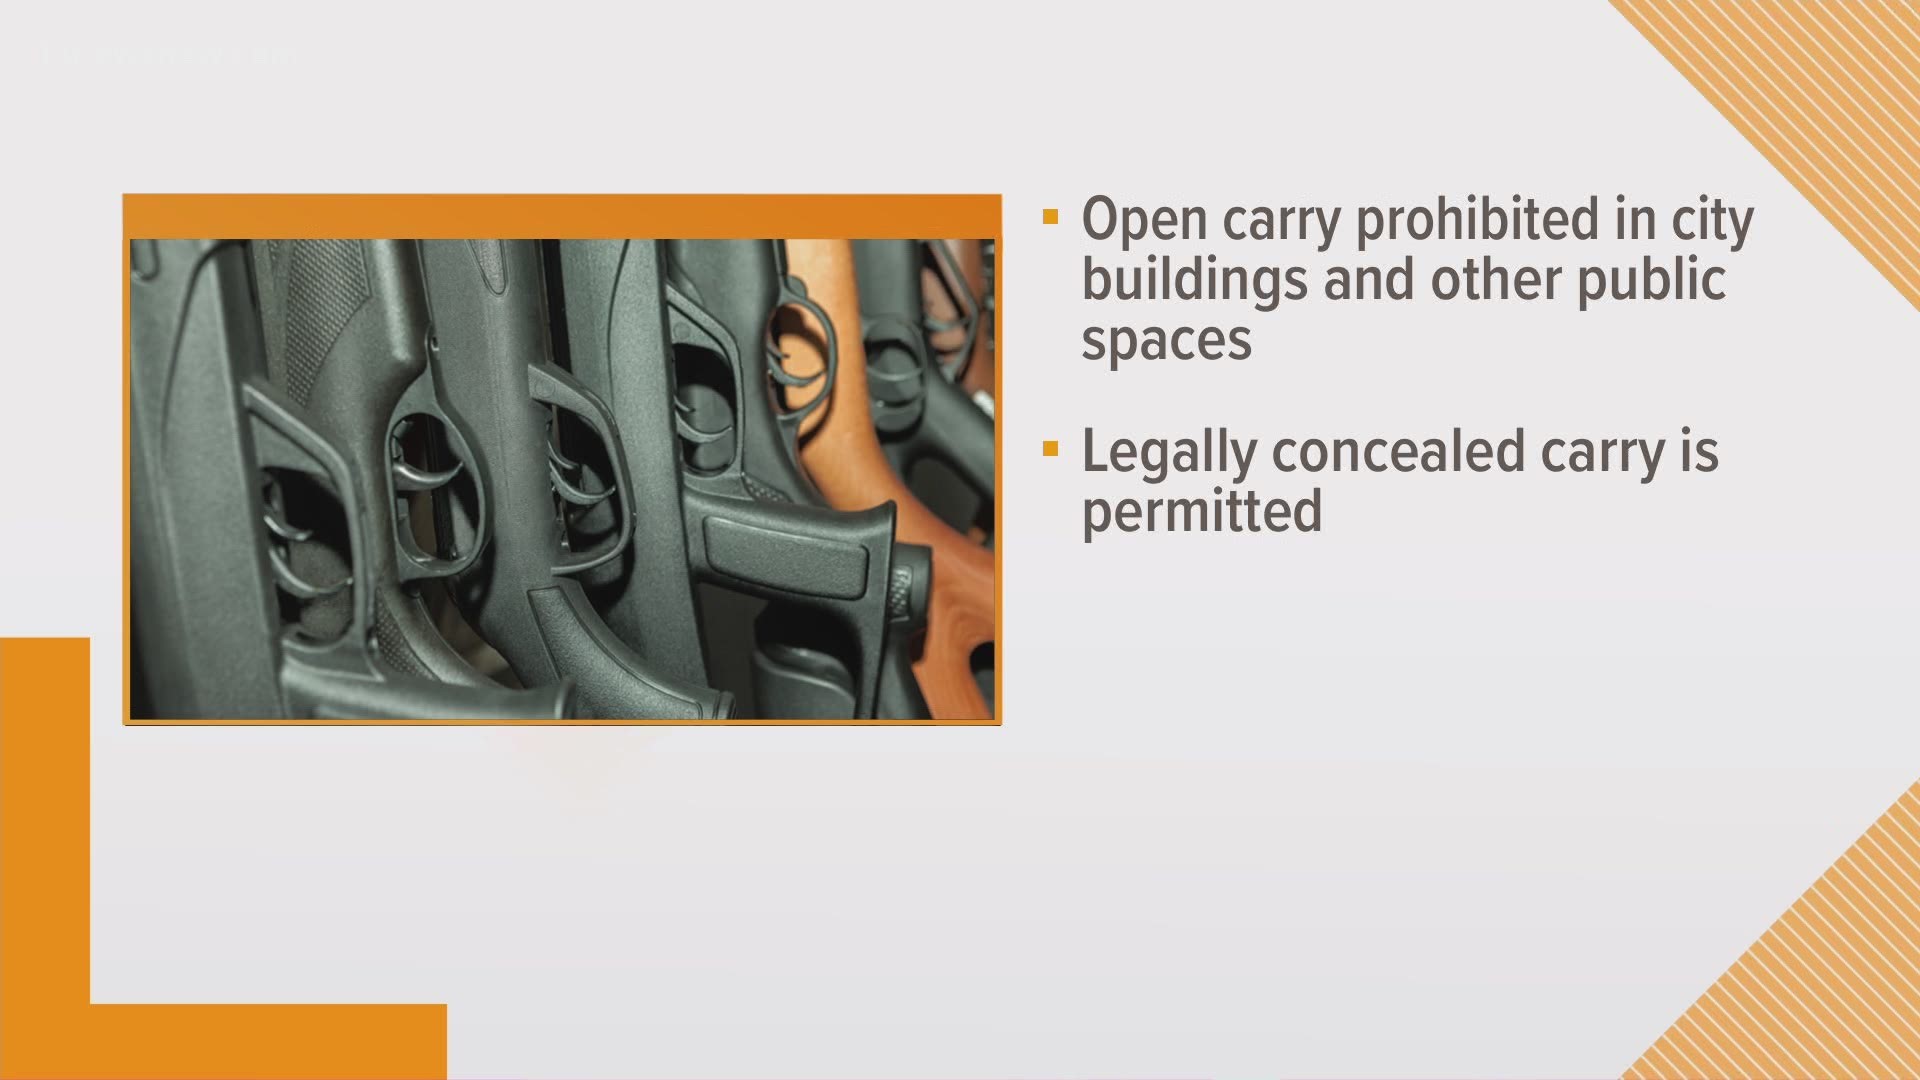 Newport News City Council approved a new ordinance that regulates firearms on public property. Legally concealed carry is permitted.